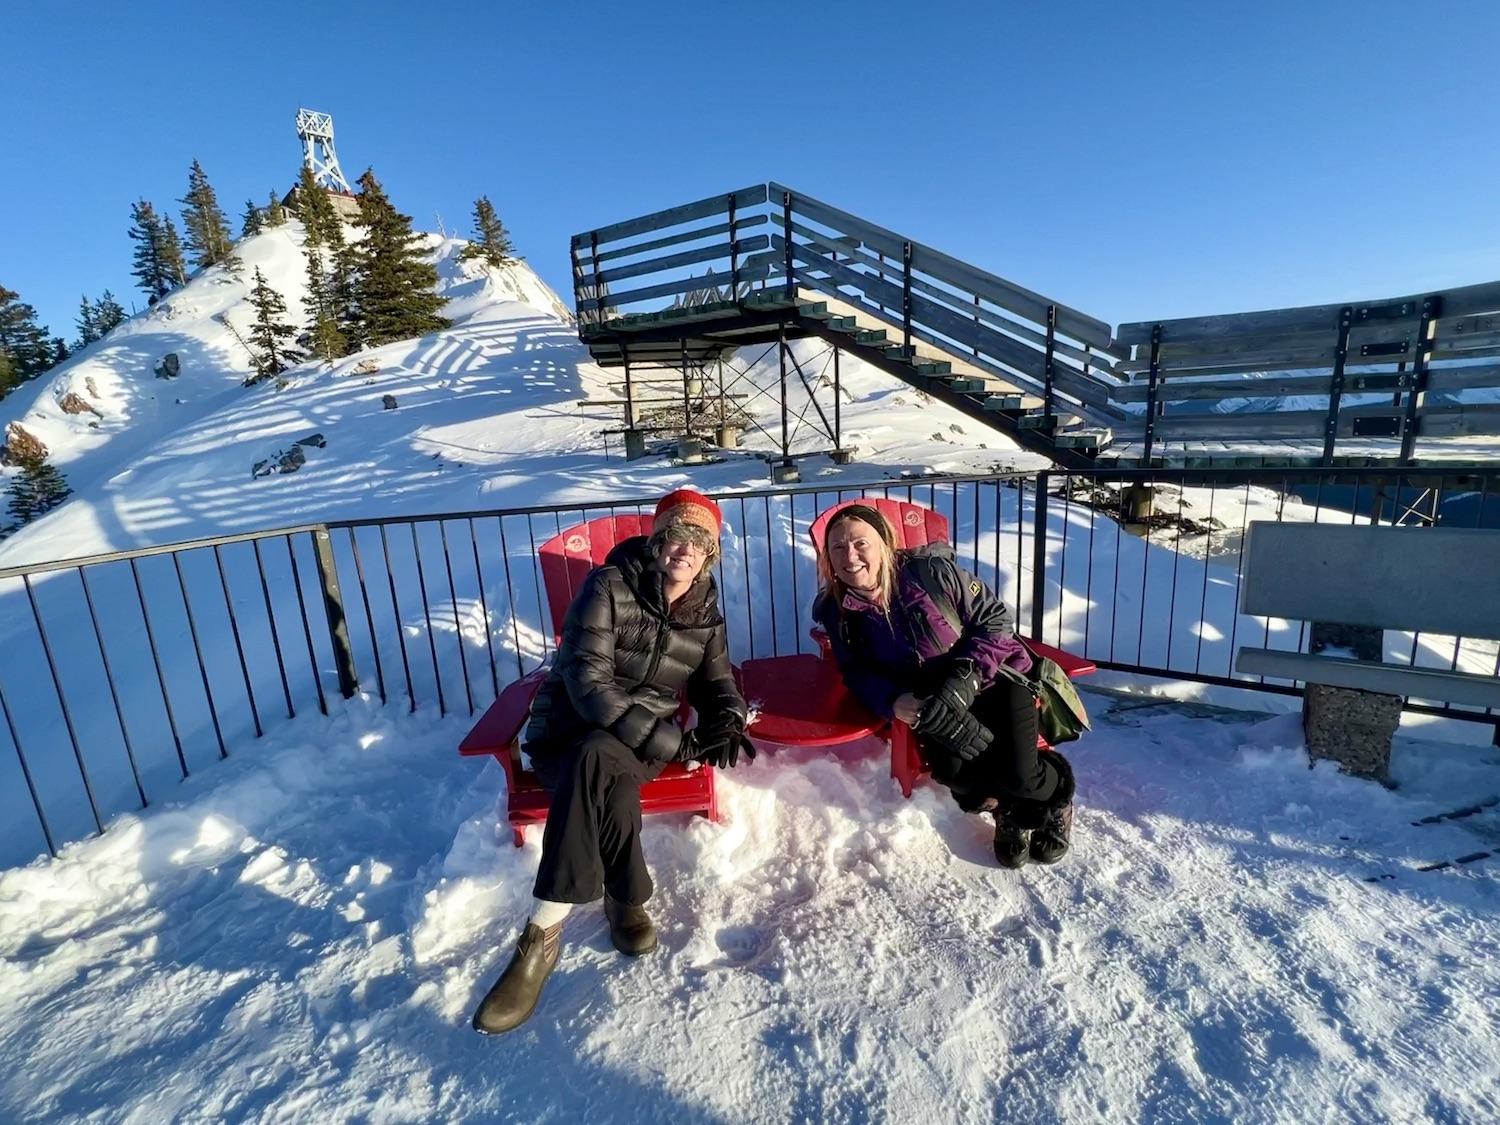 Under what's left of the Sulphur Mountain Cosmic Ray Station National Historic Site and a 1903 weather observatory, Jennifer Bain and Maureen Littlejohn sit in two of the red chairs that Parks Canada places in scenic spots across the country